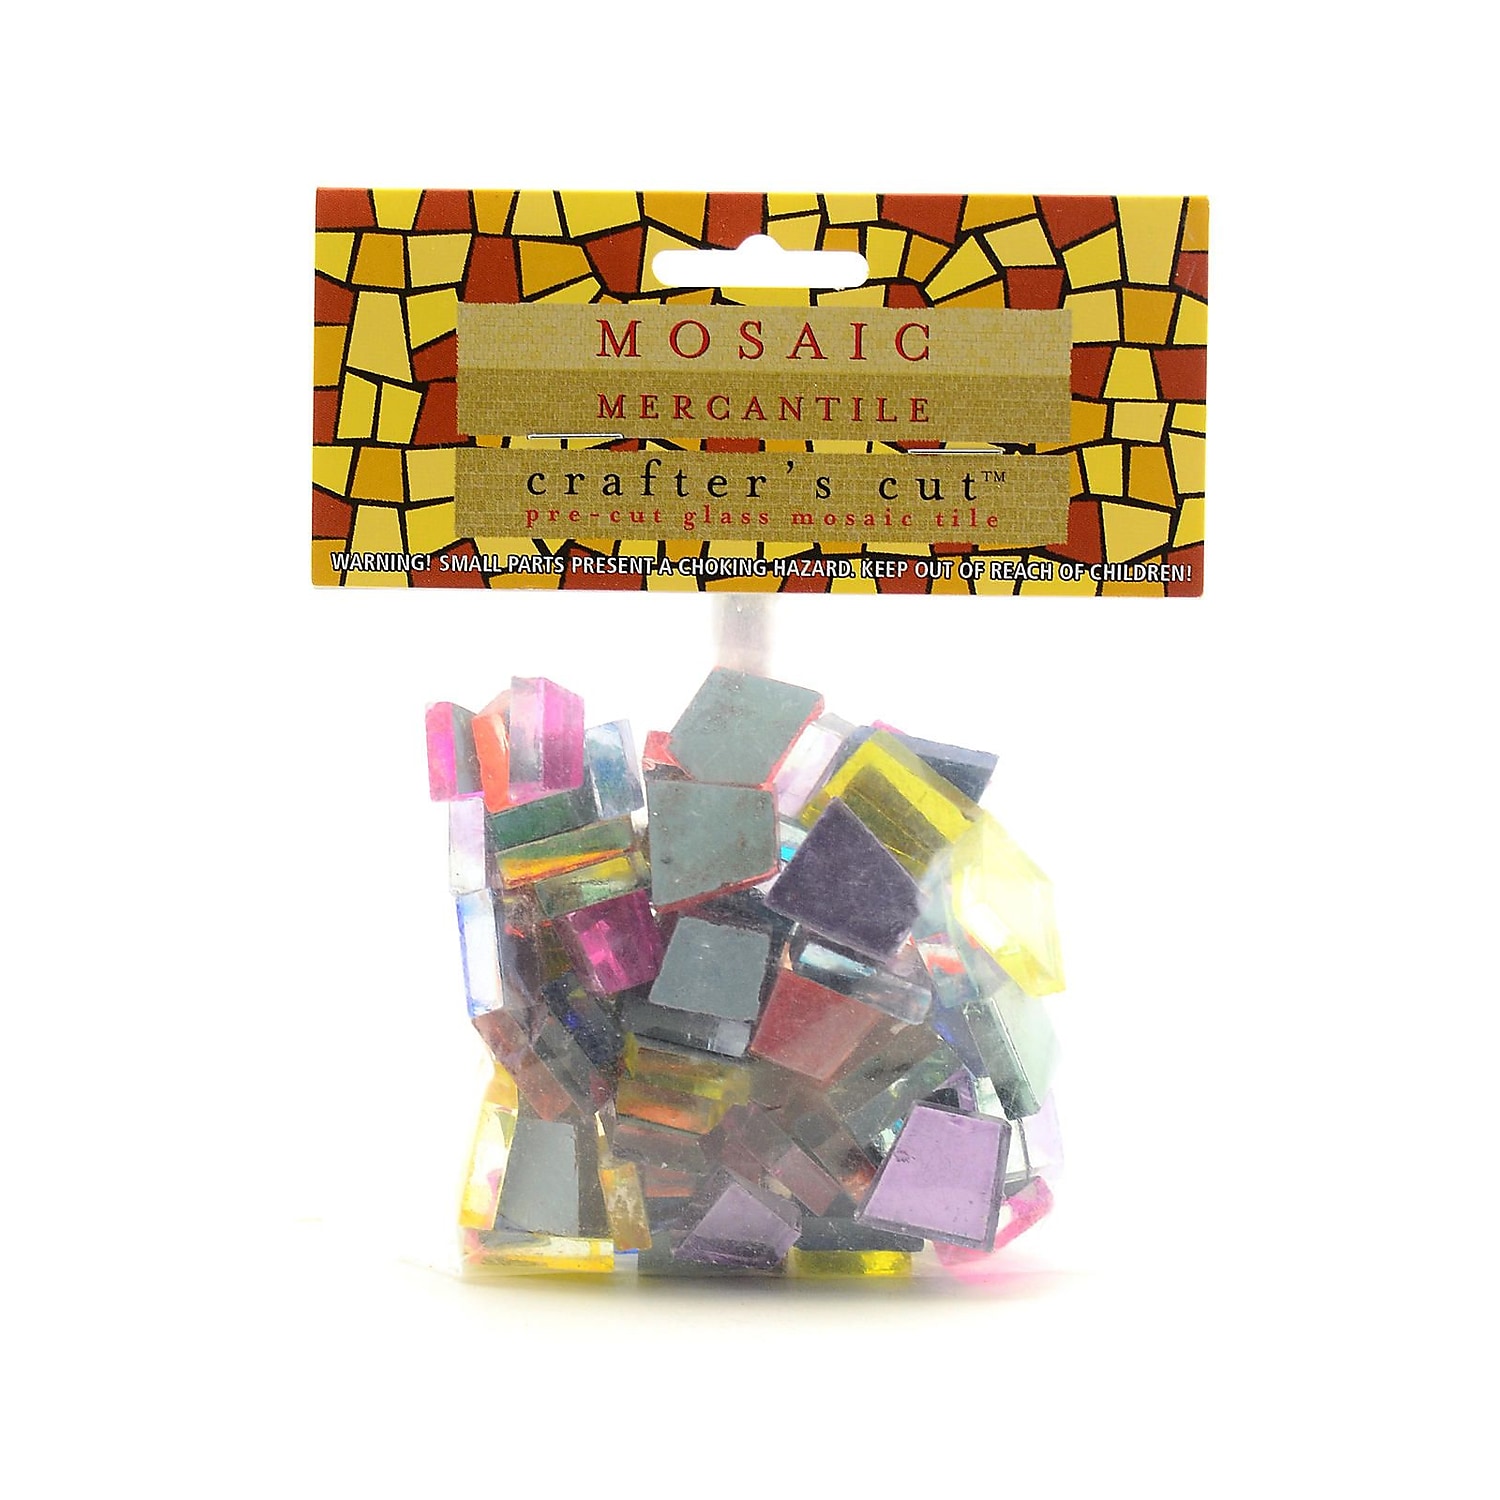 Mosaic Mercantile CC-MR Crafters Cut Colored Mirrors 1-2 Pound-Pkg-Assorted - image 1 of 2